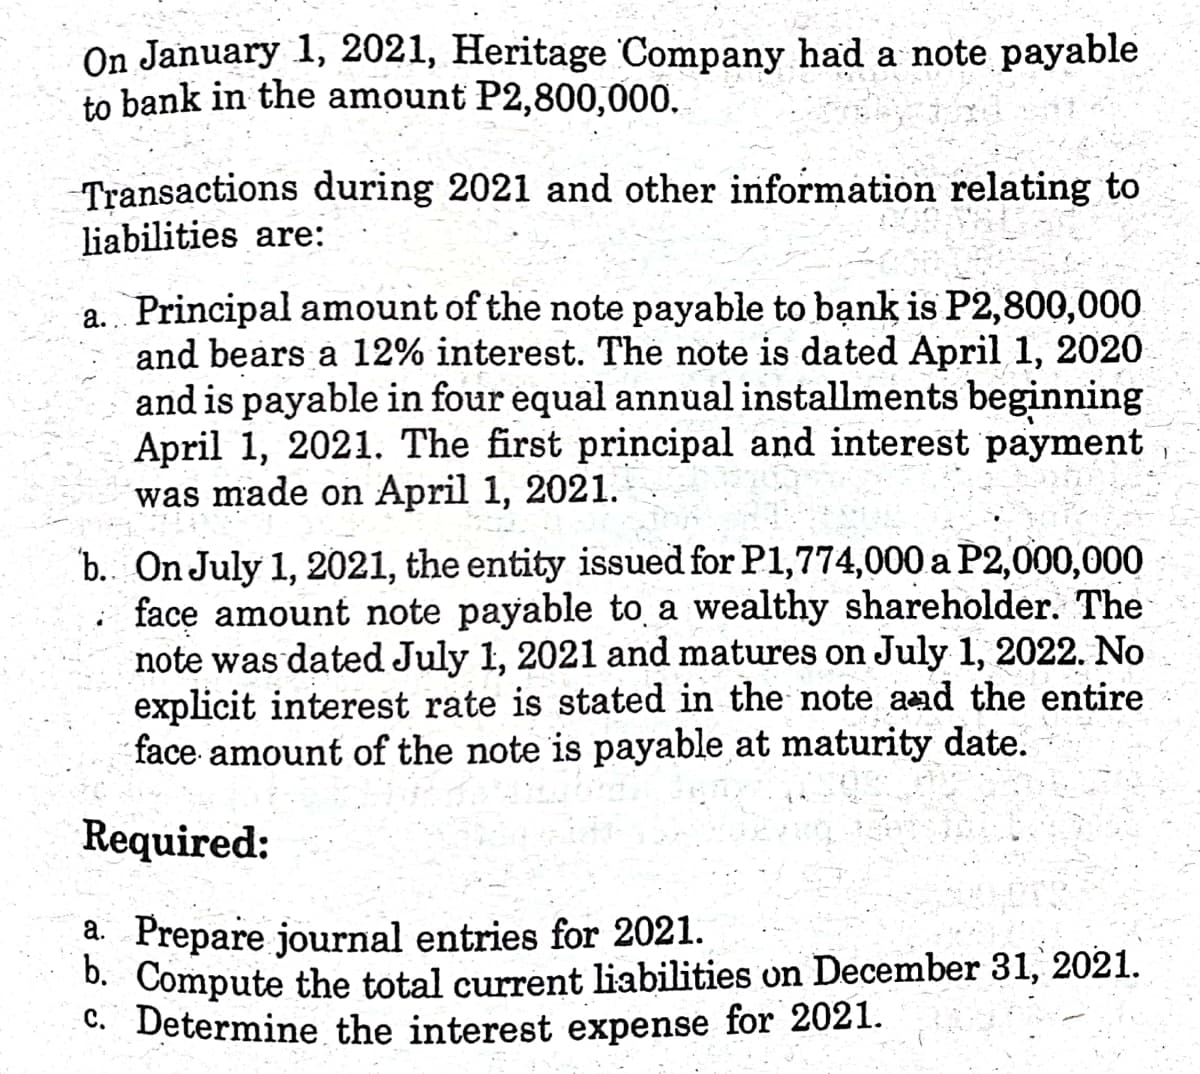 On January 1, 2021, Heritage Company had a note payable
to bank in the amount P2,800,000.
Transactions during 2021 and other information relating to
liabilities are:
a. Principal amount of the note payable to bạnk is P2,800,000
and bears a 12% interest. The note is dated April 1, 2020
and is payable in four equal annual installments beginning
April 1, 2021. The first principal and interest payment
was made on April 1, 2021.
b. On July 1, 2021, the entity issued for P1,774,000 a P2,000,000
: face amount note payable to a wealthy shareholder. The
note was dated July 1, 2021 and matures on July 1, 2022. No
explicit interest rate is stated in the note aad the entire
face amount of the note is payable at maturity date.
Required:
a. Prepare journal entries for 2021.
0. Compute the total current liabilities on December 31, 2021.
C. Determine the interest expense for 2021.
